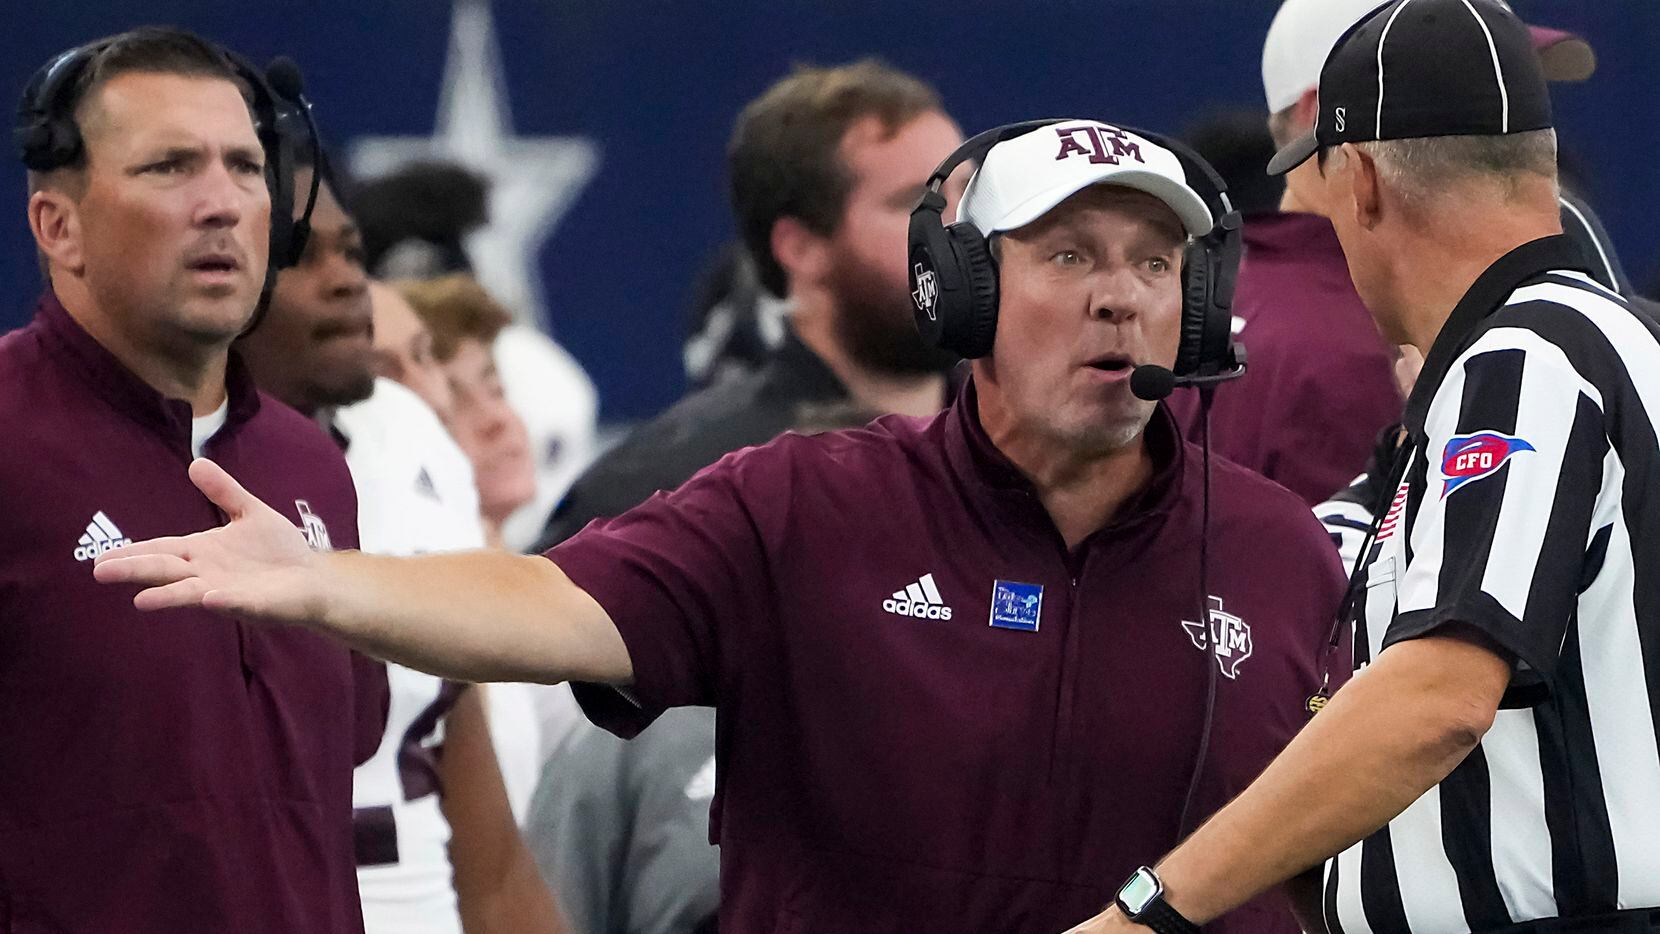 Texas A&M head coach Jimbo Fisher argues for a call during the first half of an NCAA football game against Arkansas at AT&T Stadium on Saturday, Sept. 25, 2021, in Arlington. (Smiley N. Pool/The Dallas Morning News)